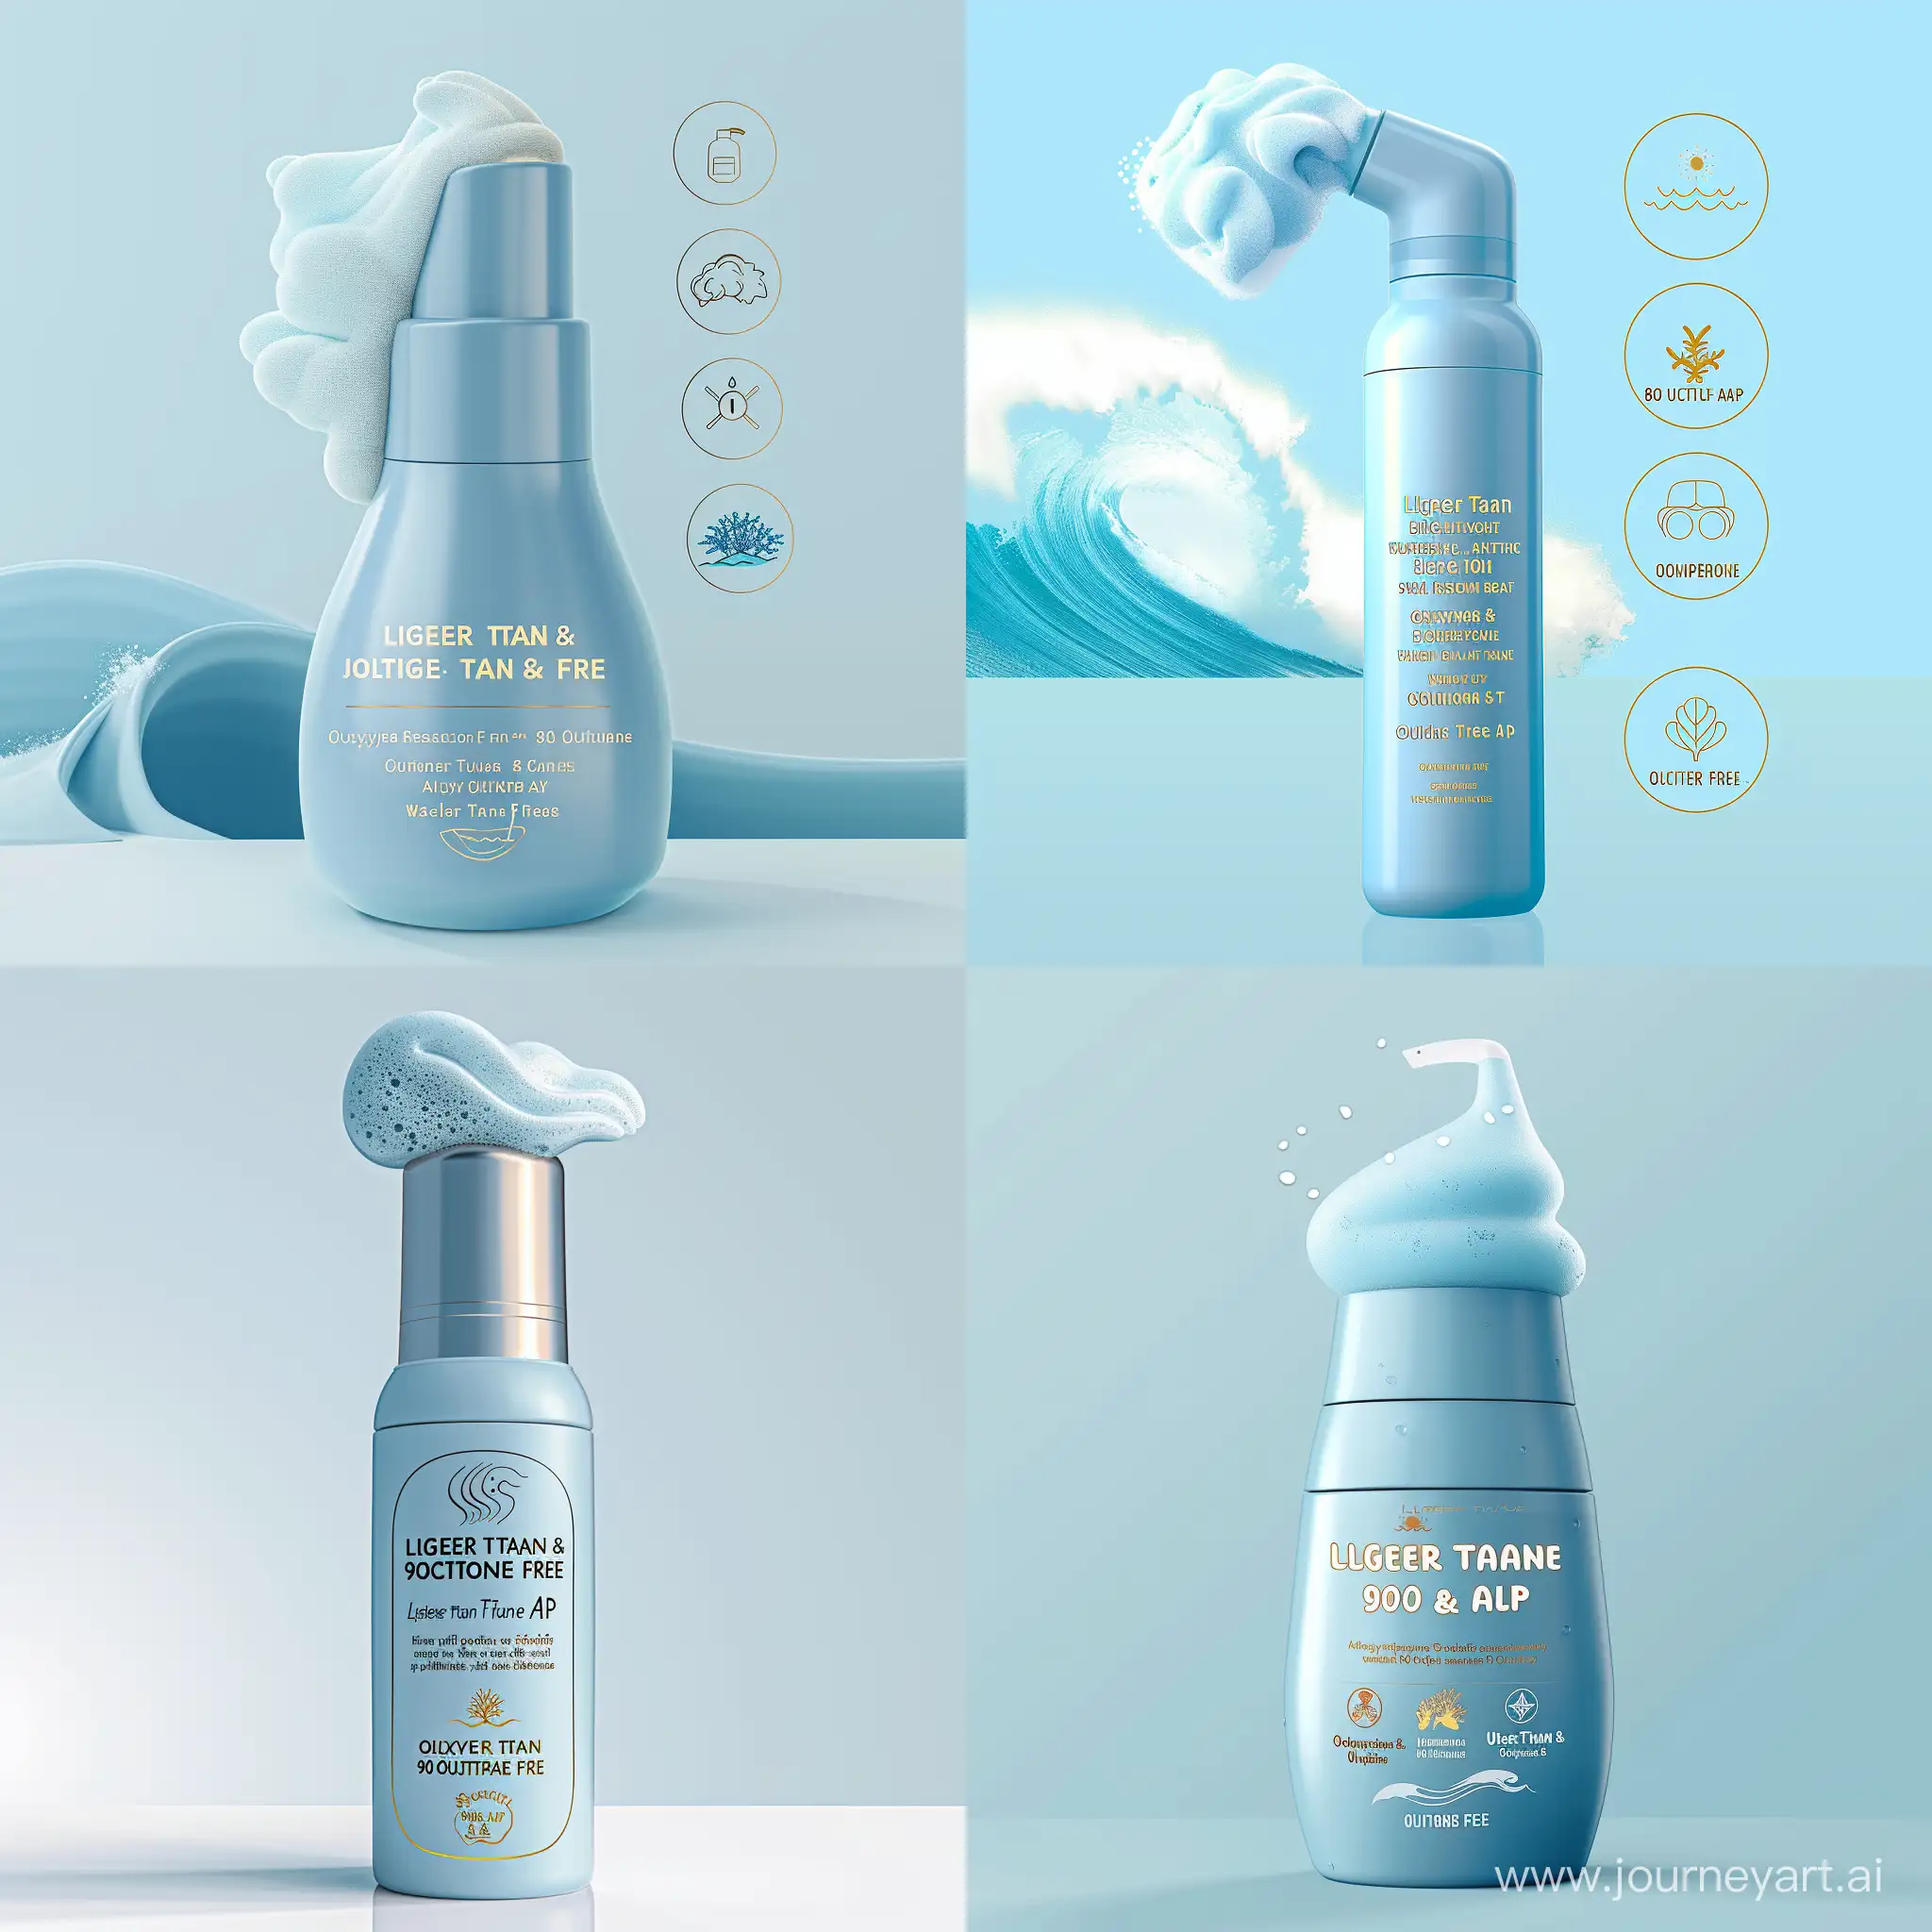 imagine a sleek, baby blue bottle. The bottle should have a foam dispenser and look luxorious and synoblize pleasure. I dont wnat to see actual foam. The labels on the bottle should be "Lighter-Than-Air" , "Water-Resistant (80 minutes)", "Oxybenzone & Octinoxate free." They should be wrtitten in gold color. Additionally, include symbols representing the product being eco-friendly, cruelty-free, and vegan attributes. Also add a small image of a wave and a coral reef